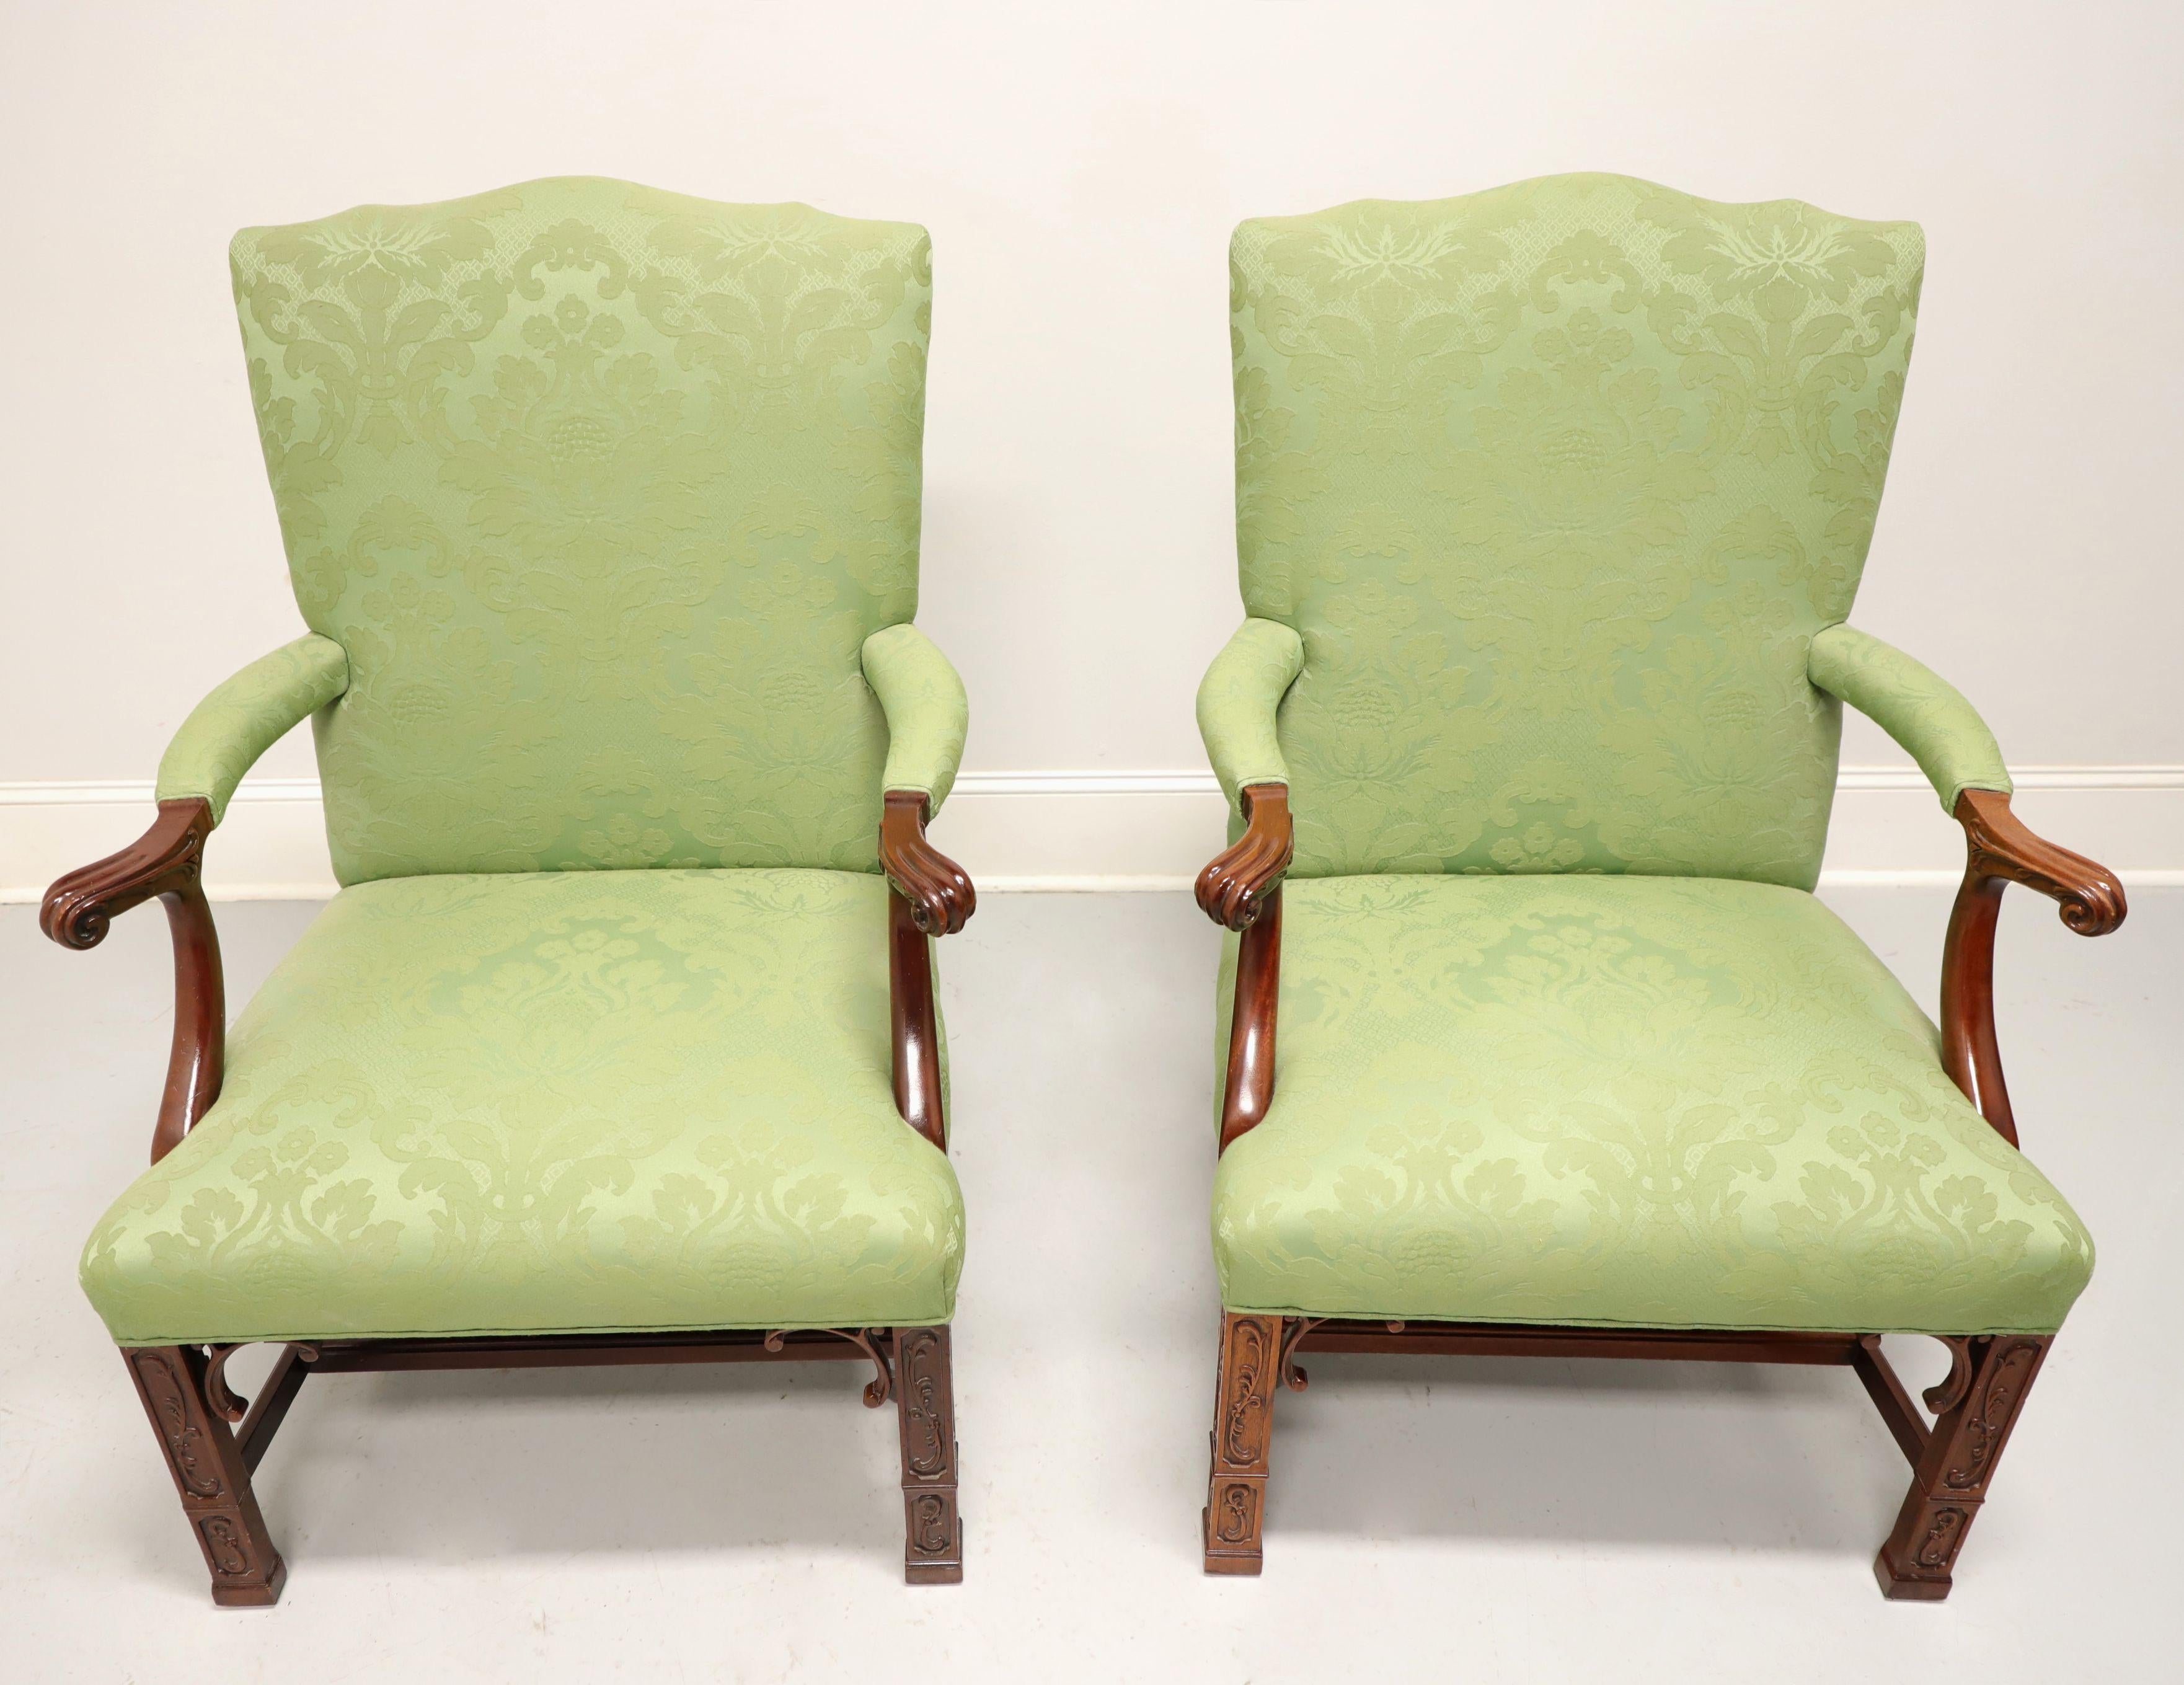 A pair of Chippendale style upholstered armchairs by Southwood, their Gainsborough. Mahogany frame, a light green color brocade fabric upholstery, upholstered scroll arms, decorative fretwork carved straight front legs, stretcher base, and capped